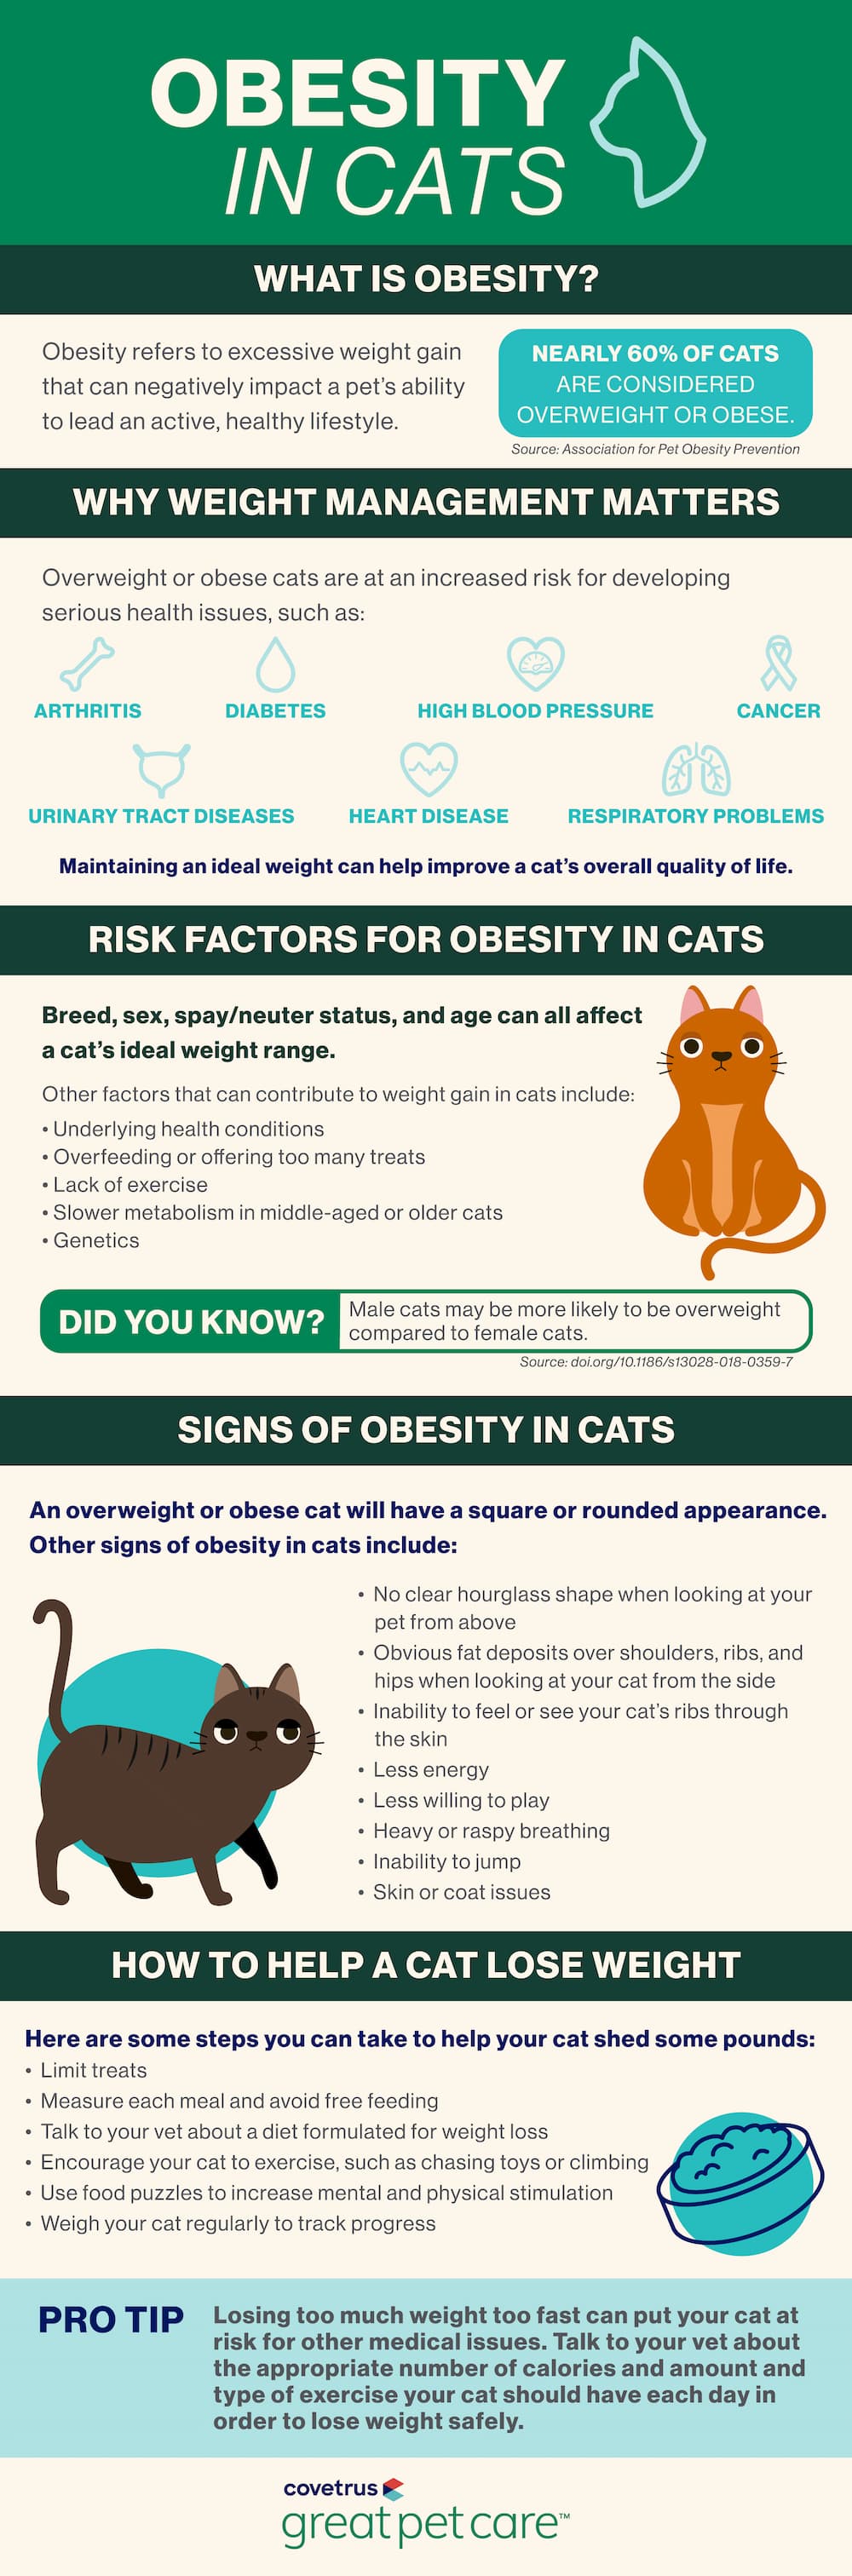 Obesity in Cats infographic